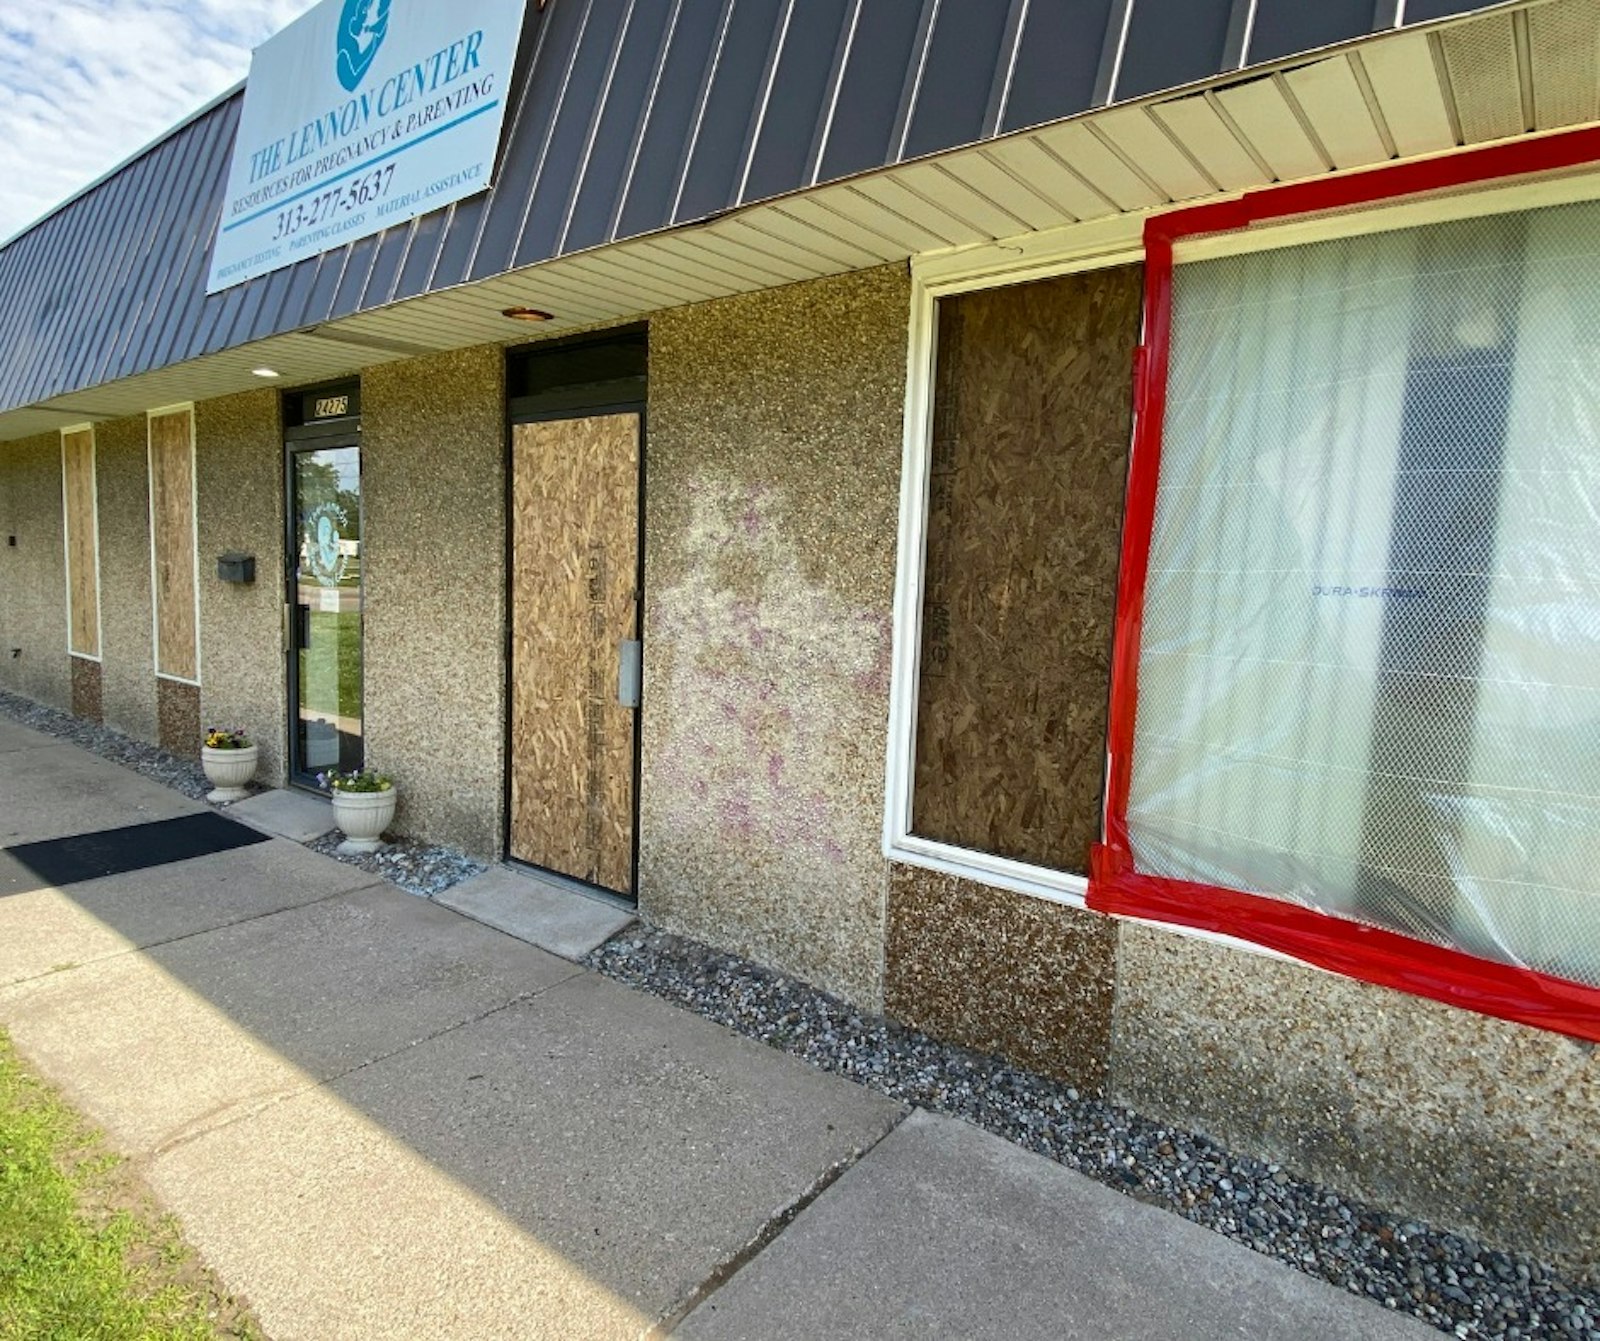 Windows are doors are boarded up at the Lennon Pregnancy Center in Dearborn Heights. In the last month, the center said it has helped 97 individuals, which included 232 boxes of material goods and 280 packages of diapers, among other services.